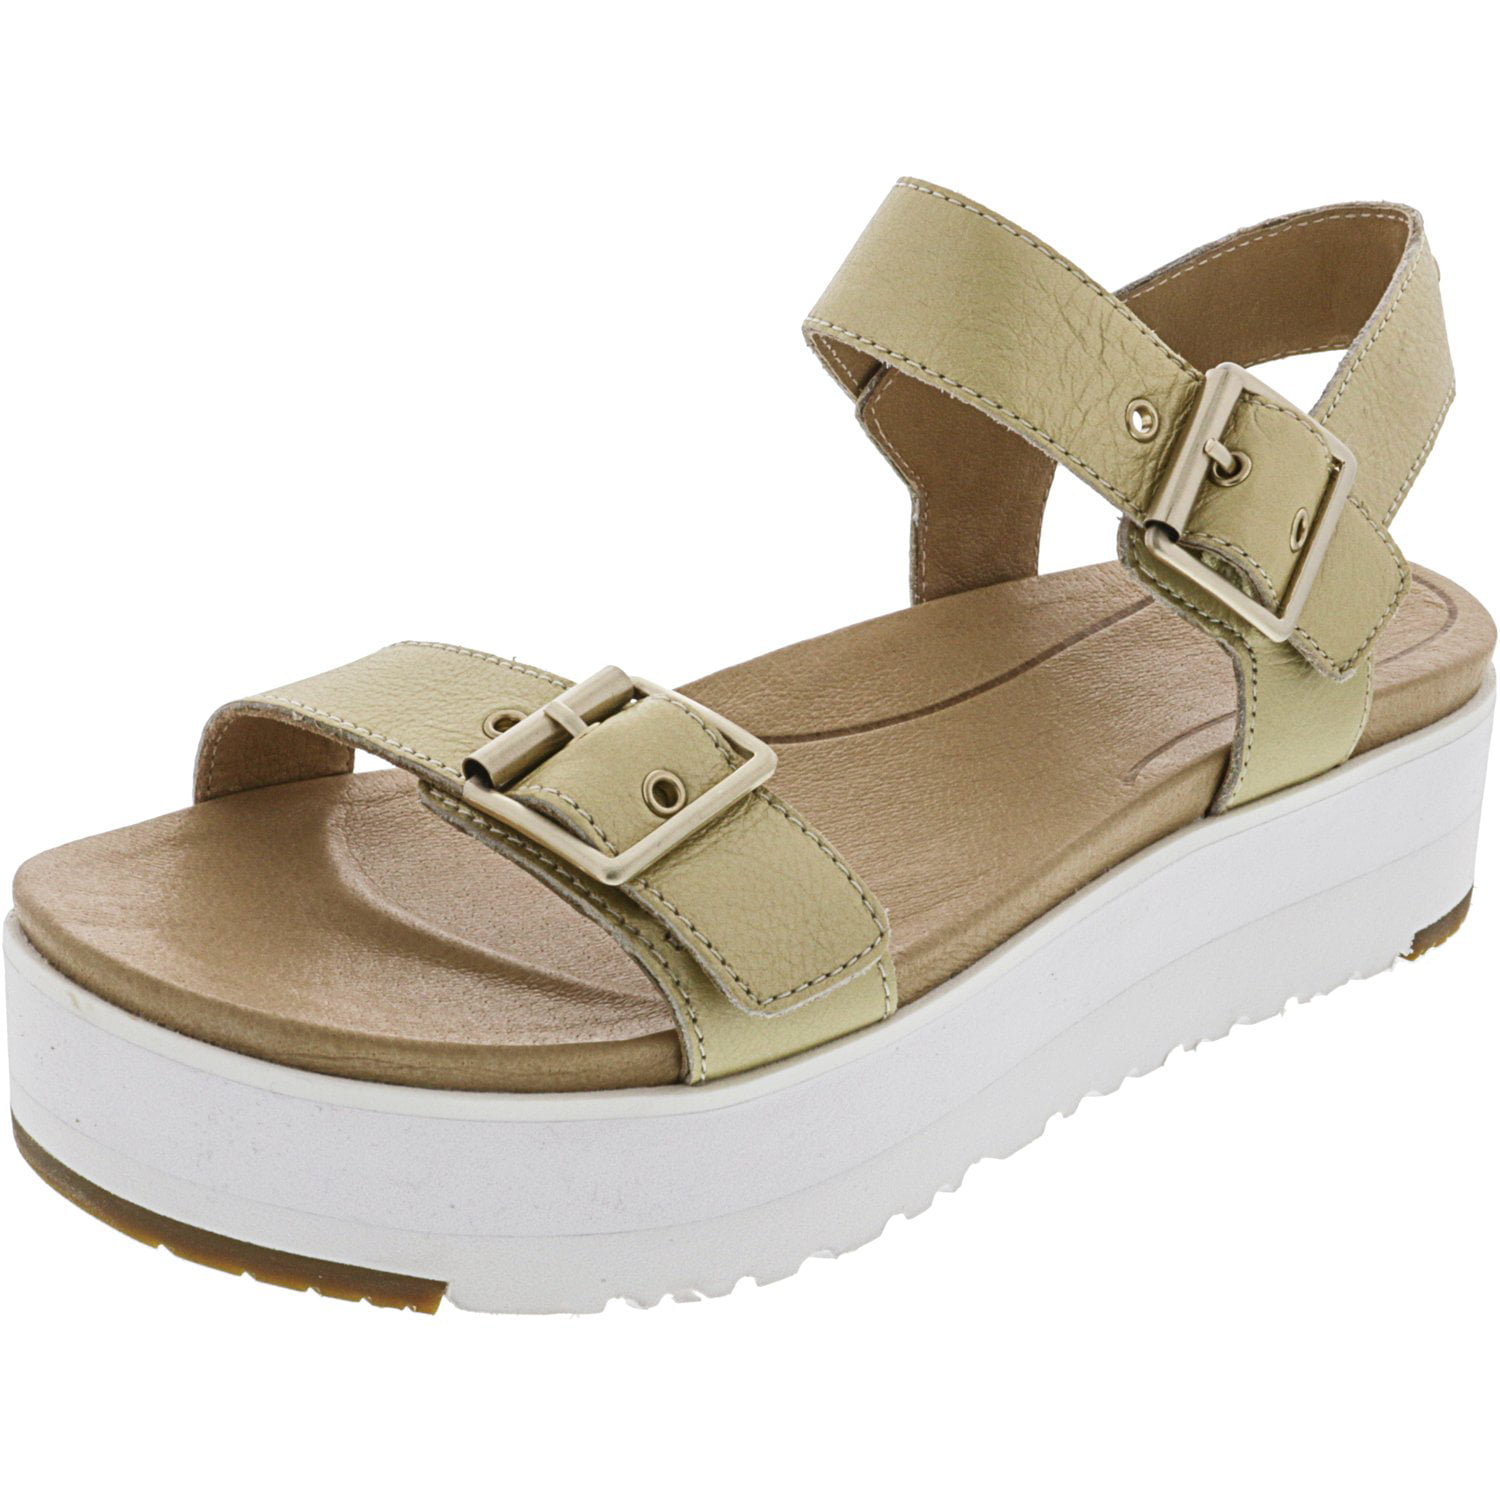 ugg angie sandals